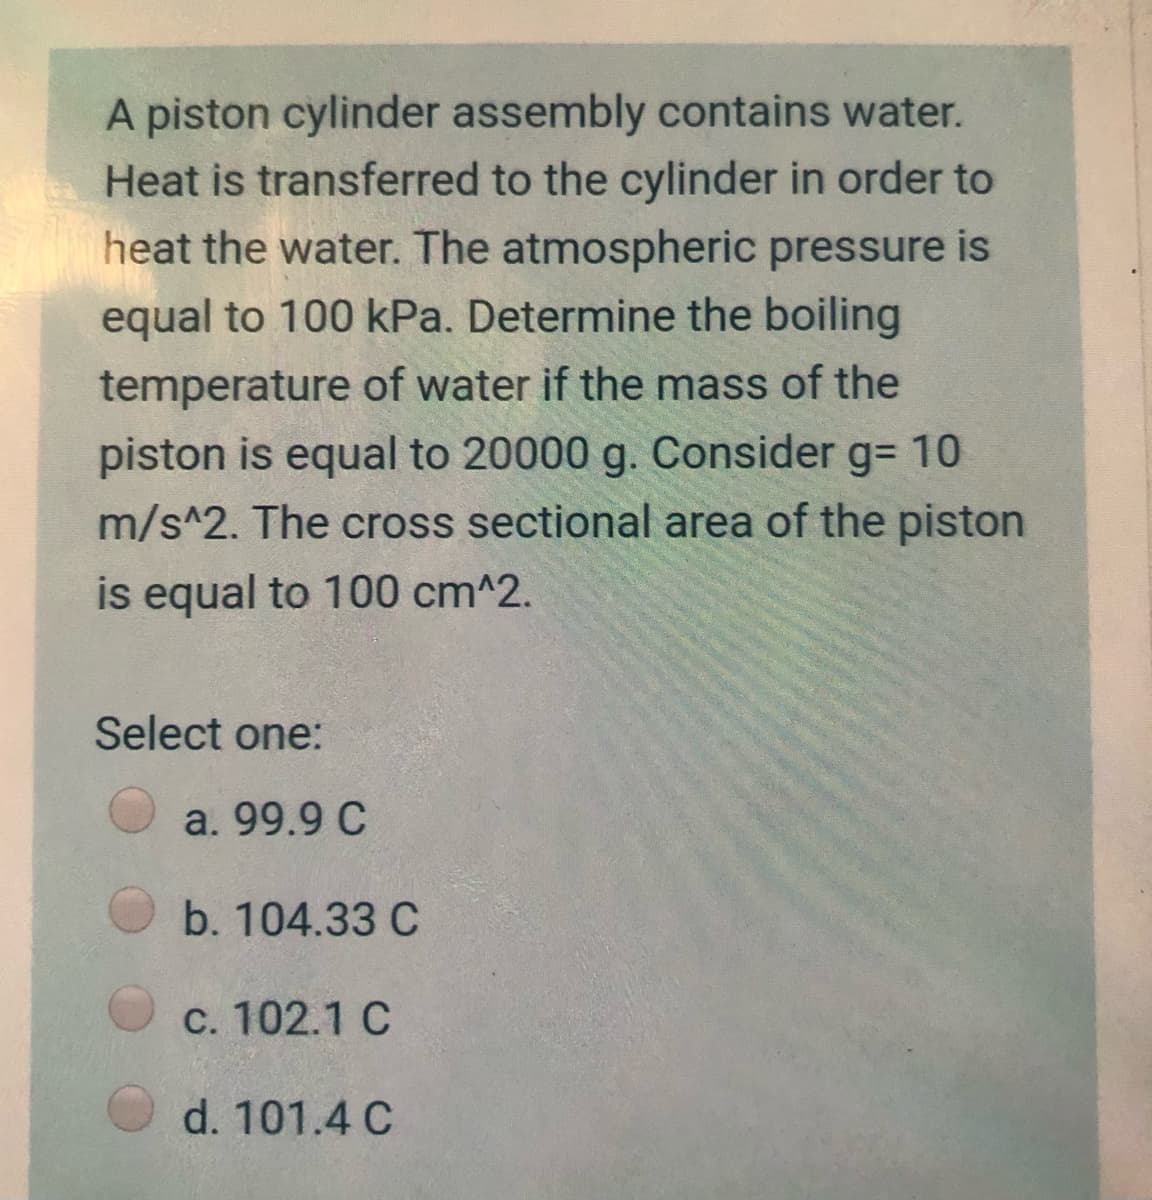 A piston cylinder assembly contains water.
Heat is transferred to the cylinder in order to
heat the water. The atmospheric pressure is
equal to 100 kPa. Determine the boiling
temperature of water if the mass of the
piston is equal to 20000 g. Consider g= 10
m/s^2. The cross sectional area of the piston
is equal to 100 cm^2.
Select one:
a. 99.9 C
b. 104.33 C
c. 102.1 C
d. 101.4 C
